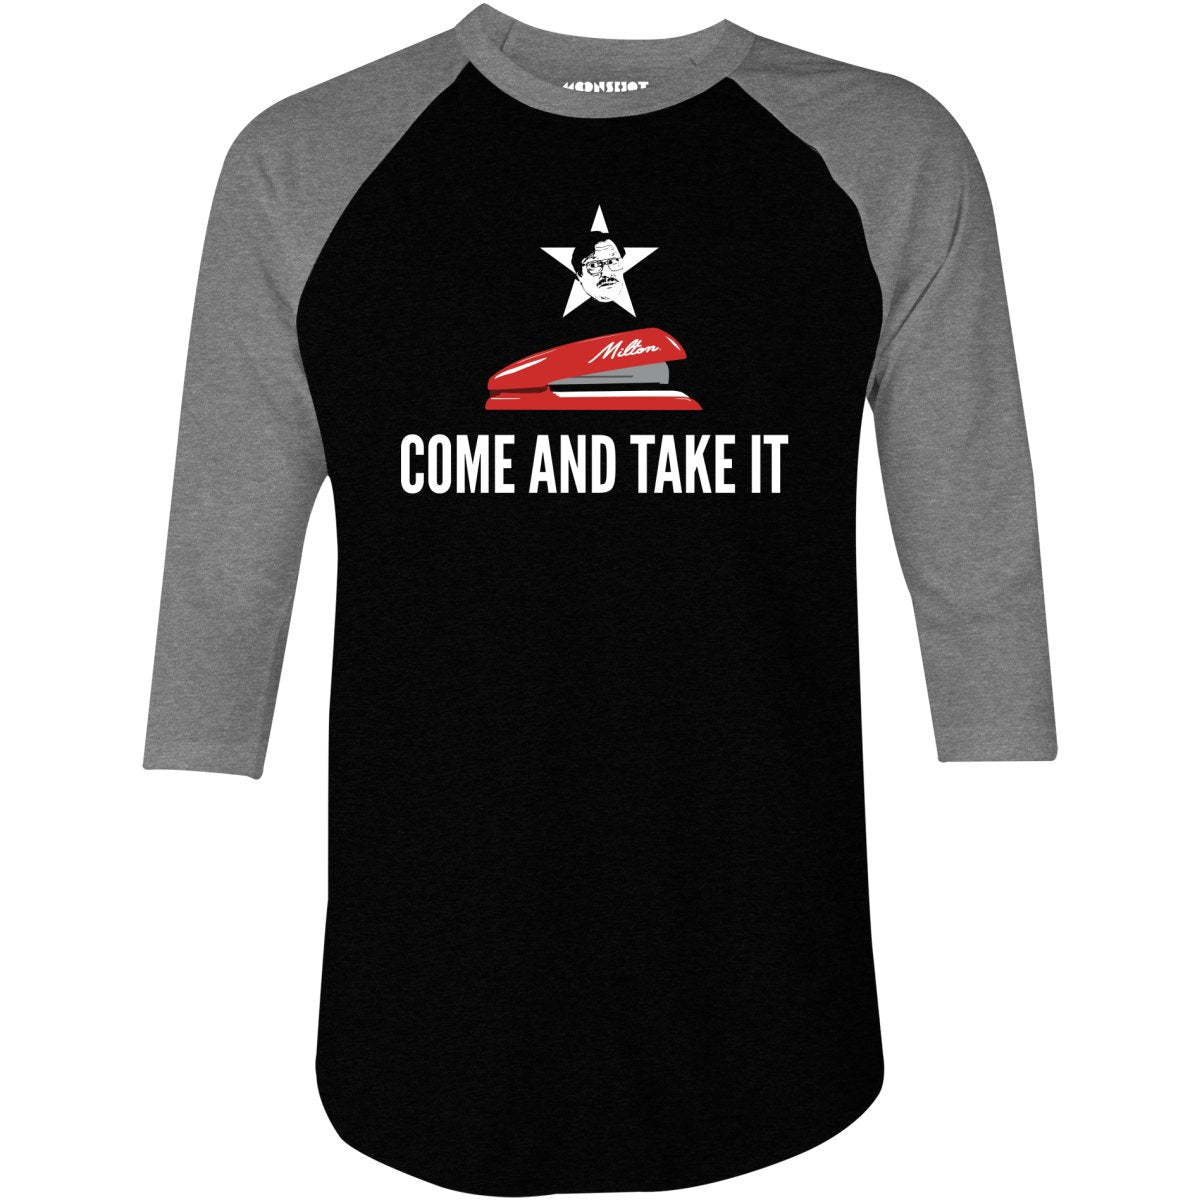 Milton's Red Stapler - Come and Take It - 3/4 Sleeve Raglan T-Shirt